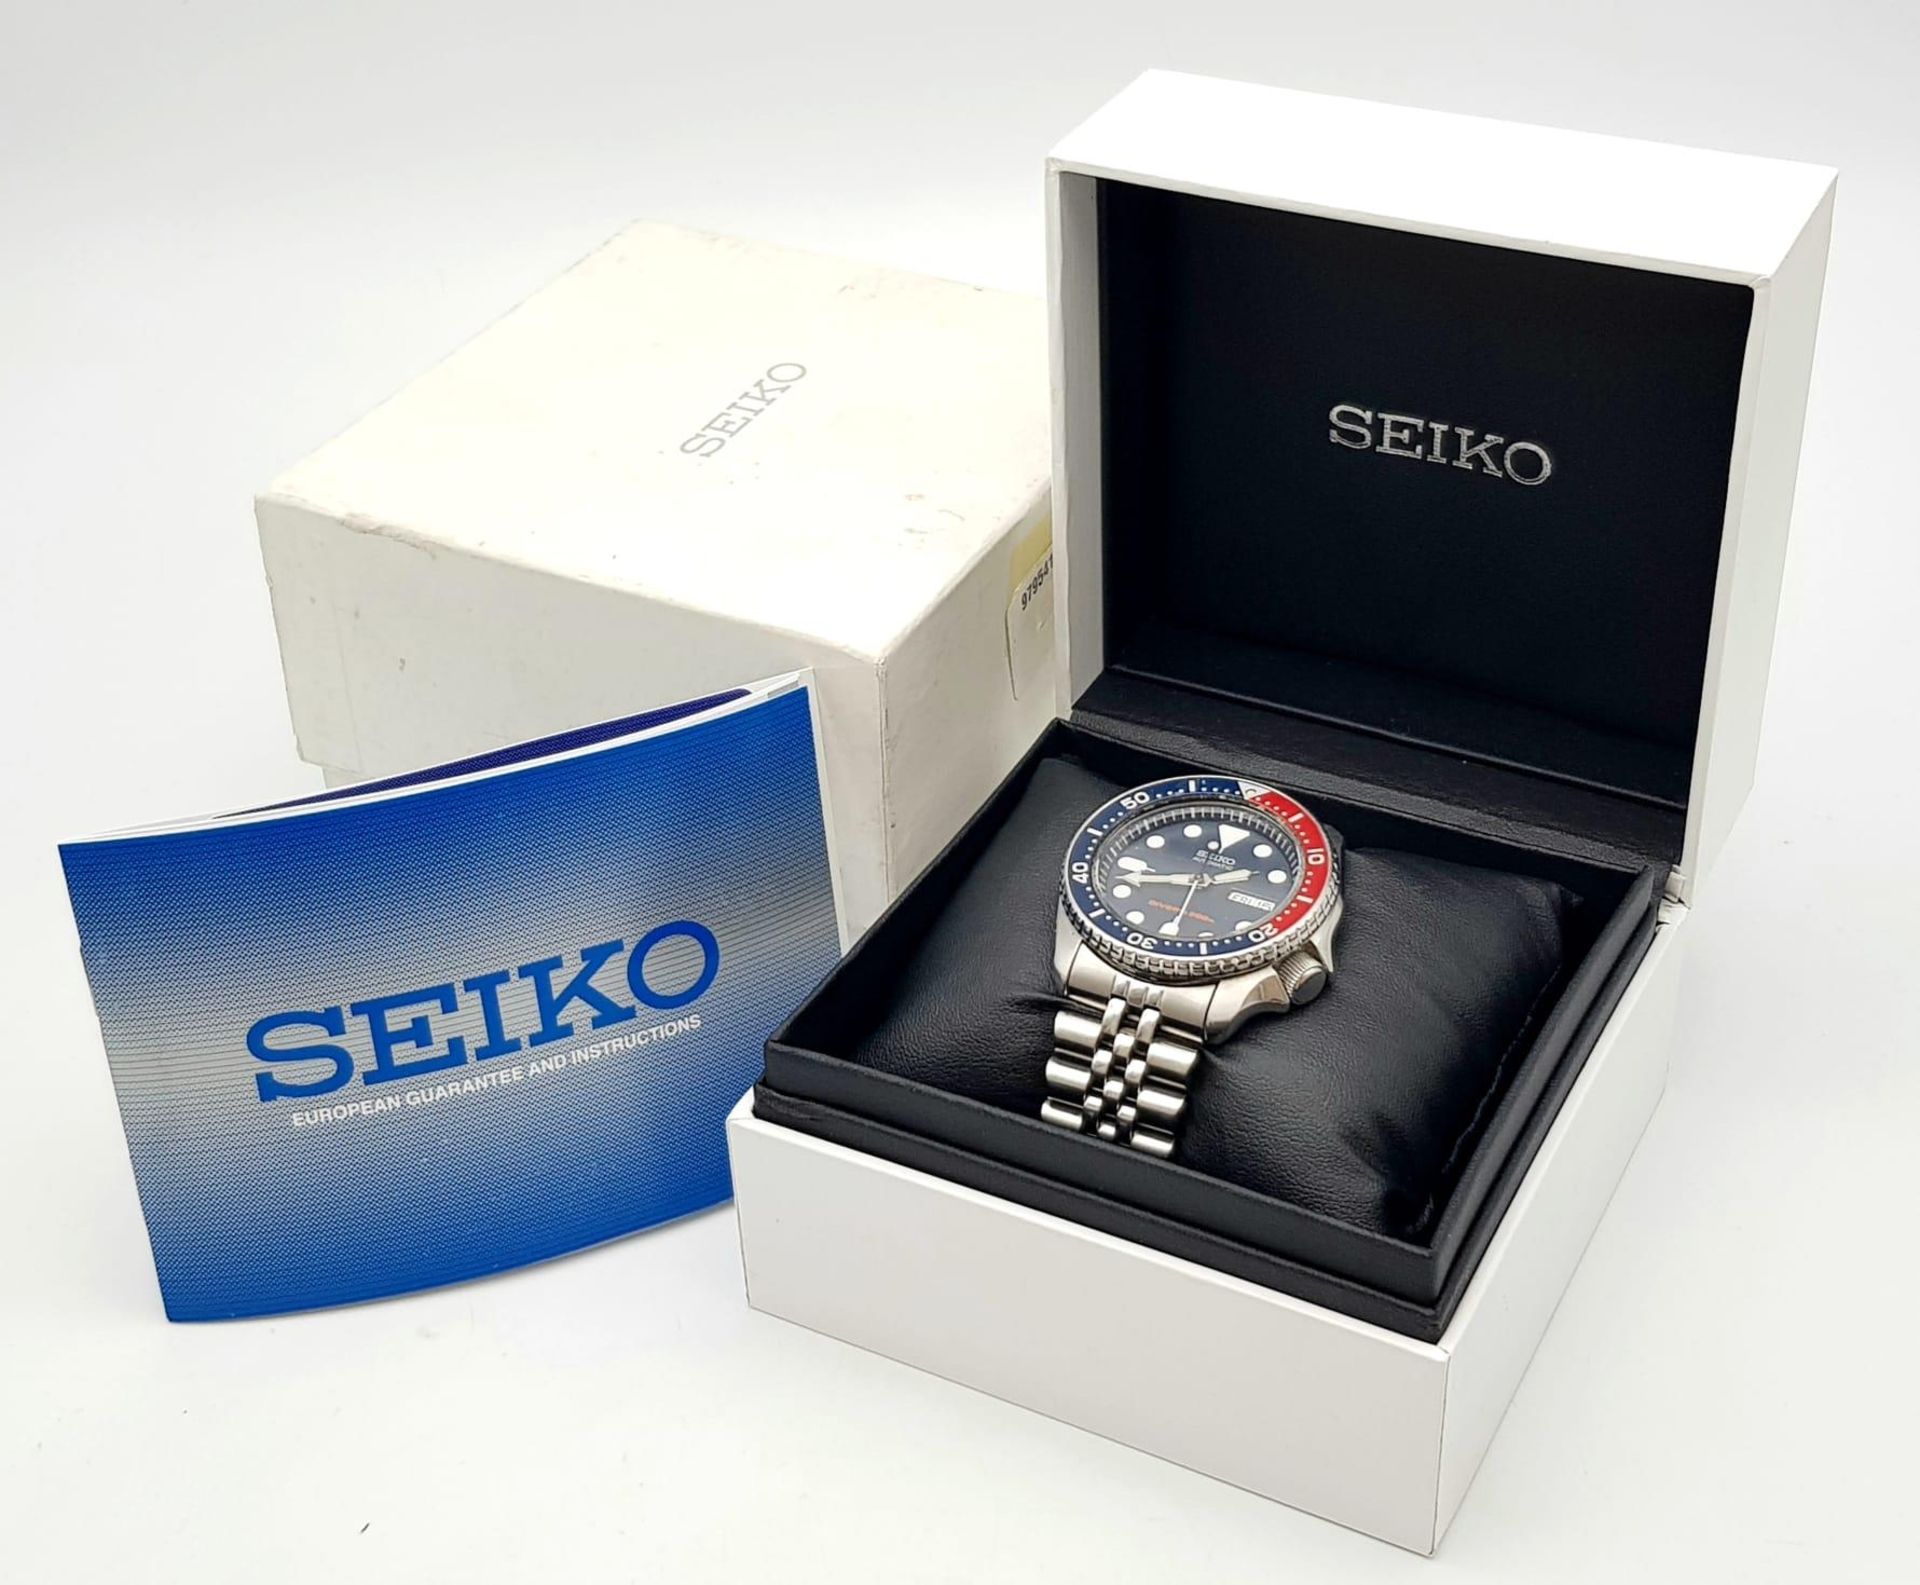 A Seiko 5 Divers 200M Automatic Gents Watch. Stainless steel bracelet and case - 42mm. Blue dial - Image 7 of 7